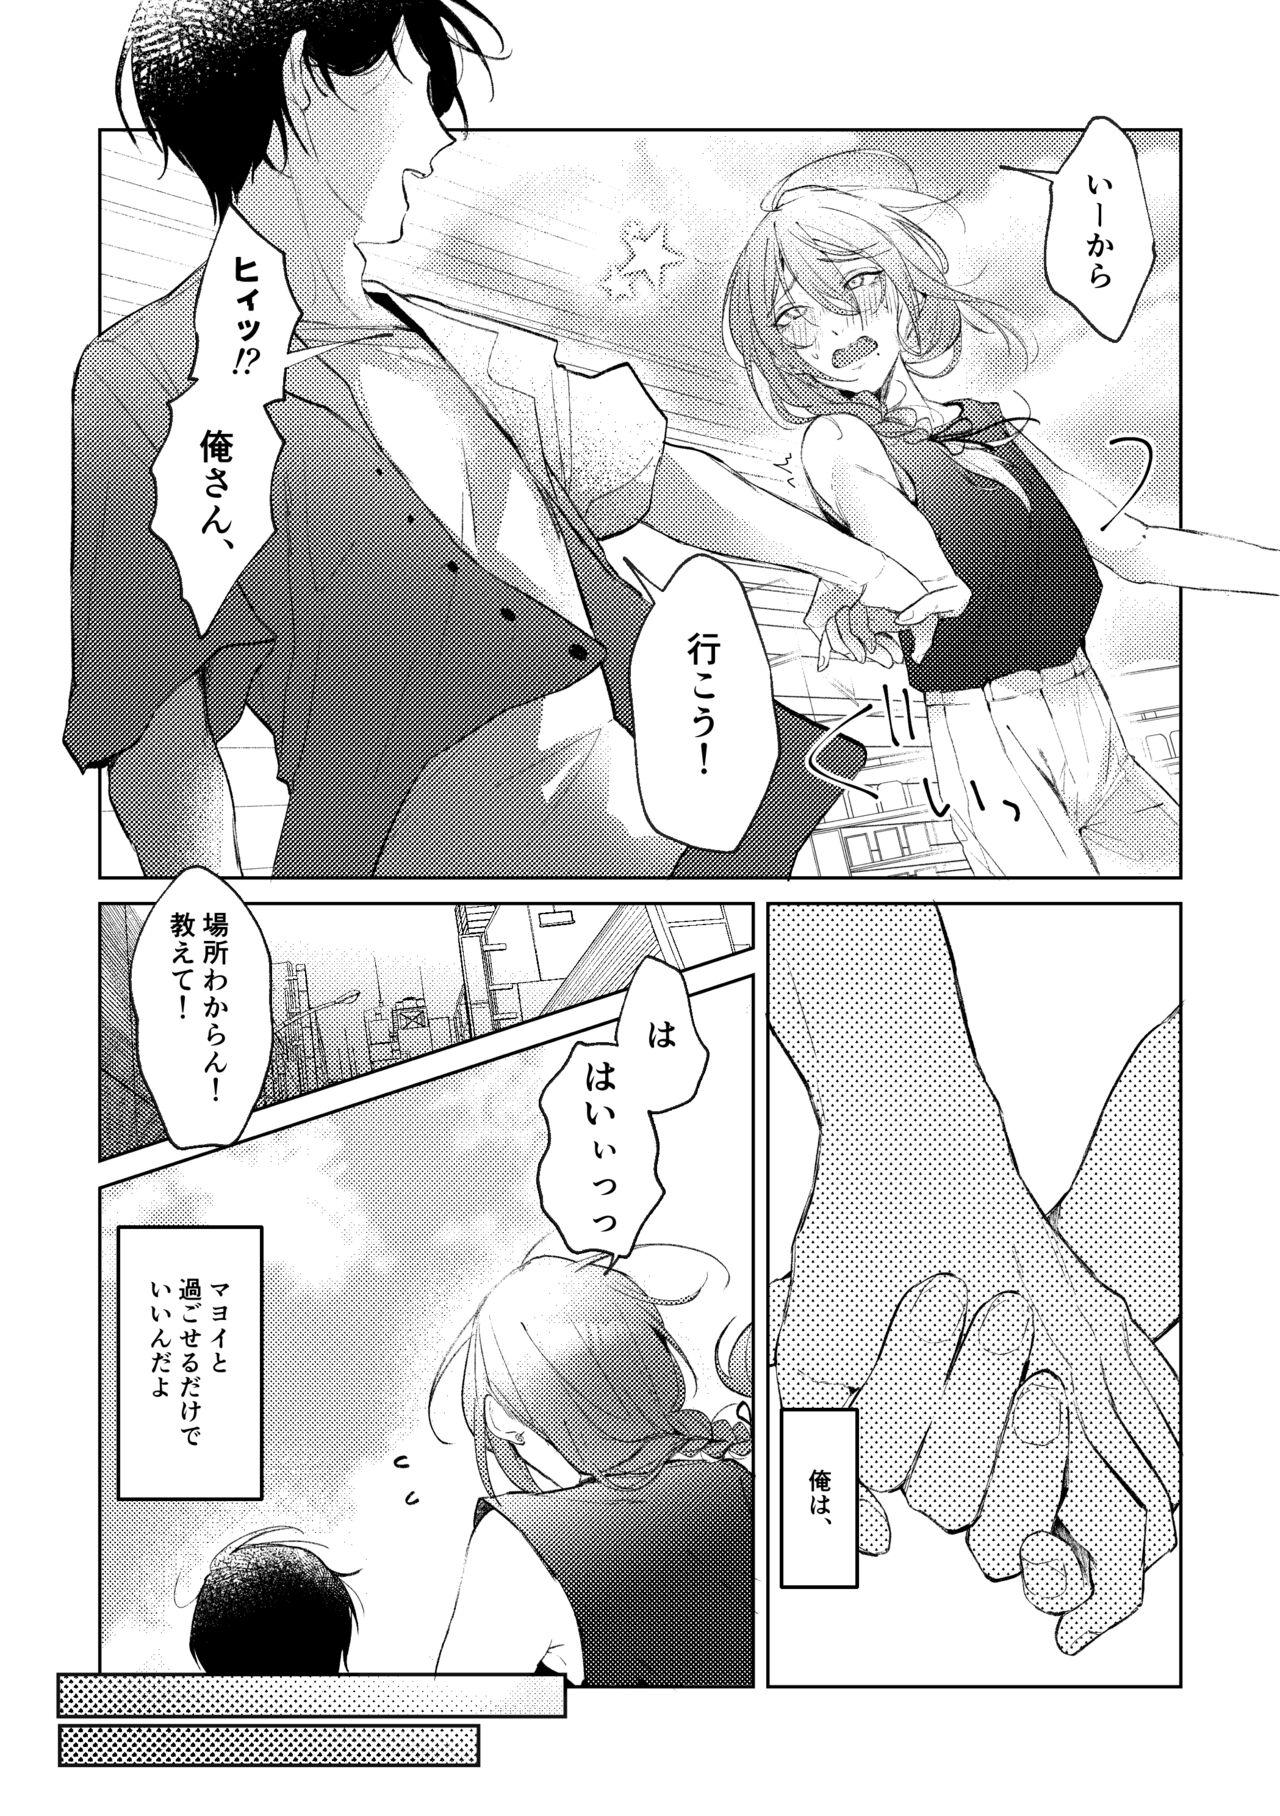 Bubble Butt 俺のカノジョのマヨイくん。 - Ensemble stars Roleplay - Page 9